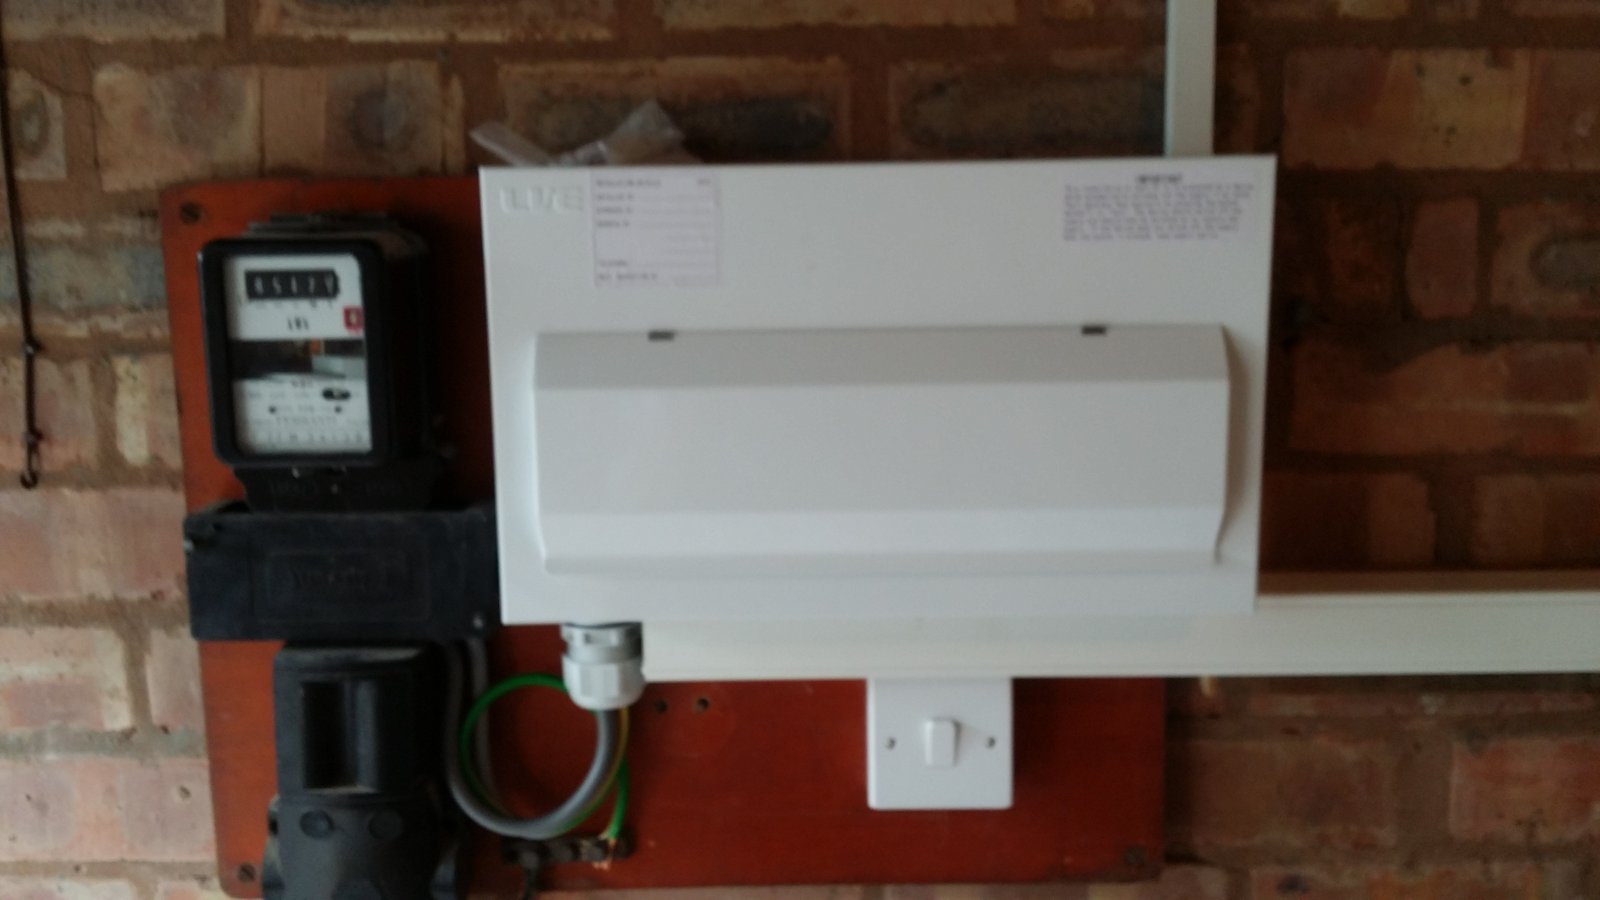 Sample of Rainhill Home Improvement and Energy Services work with meters and circuit boards